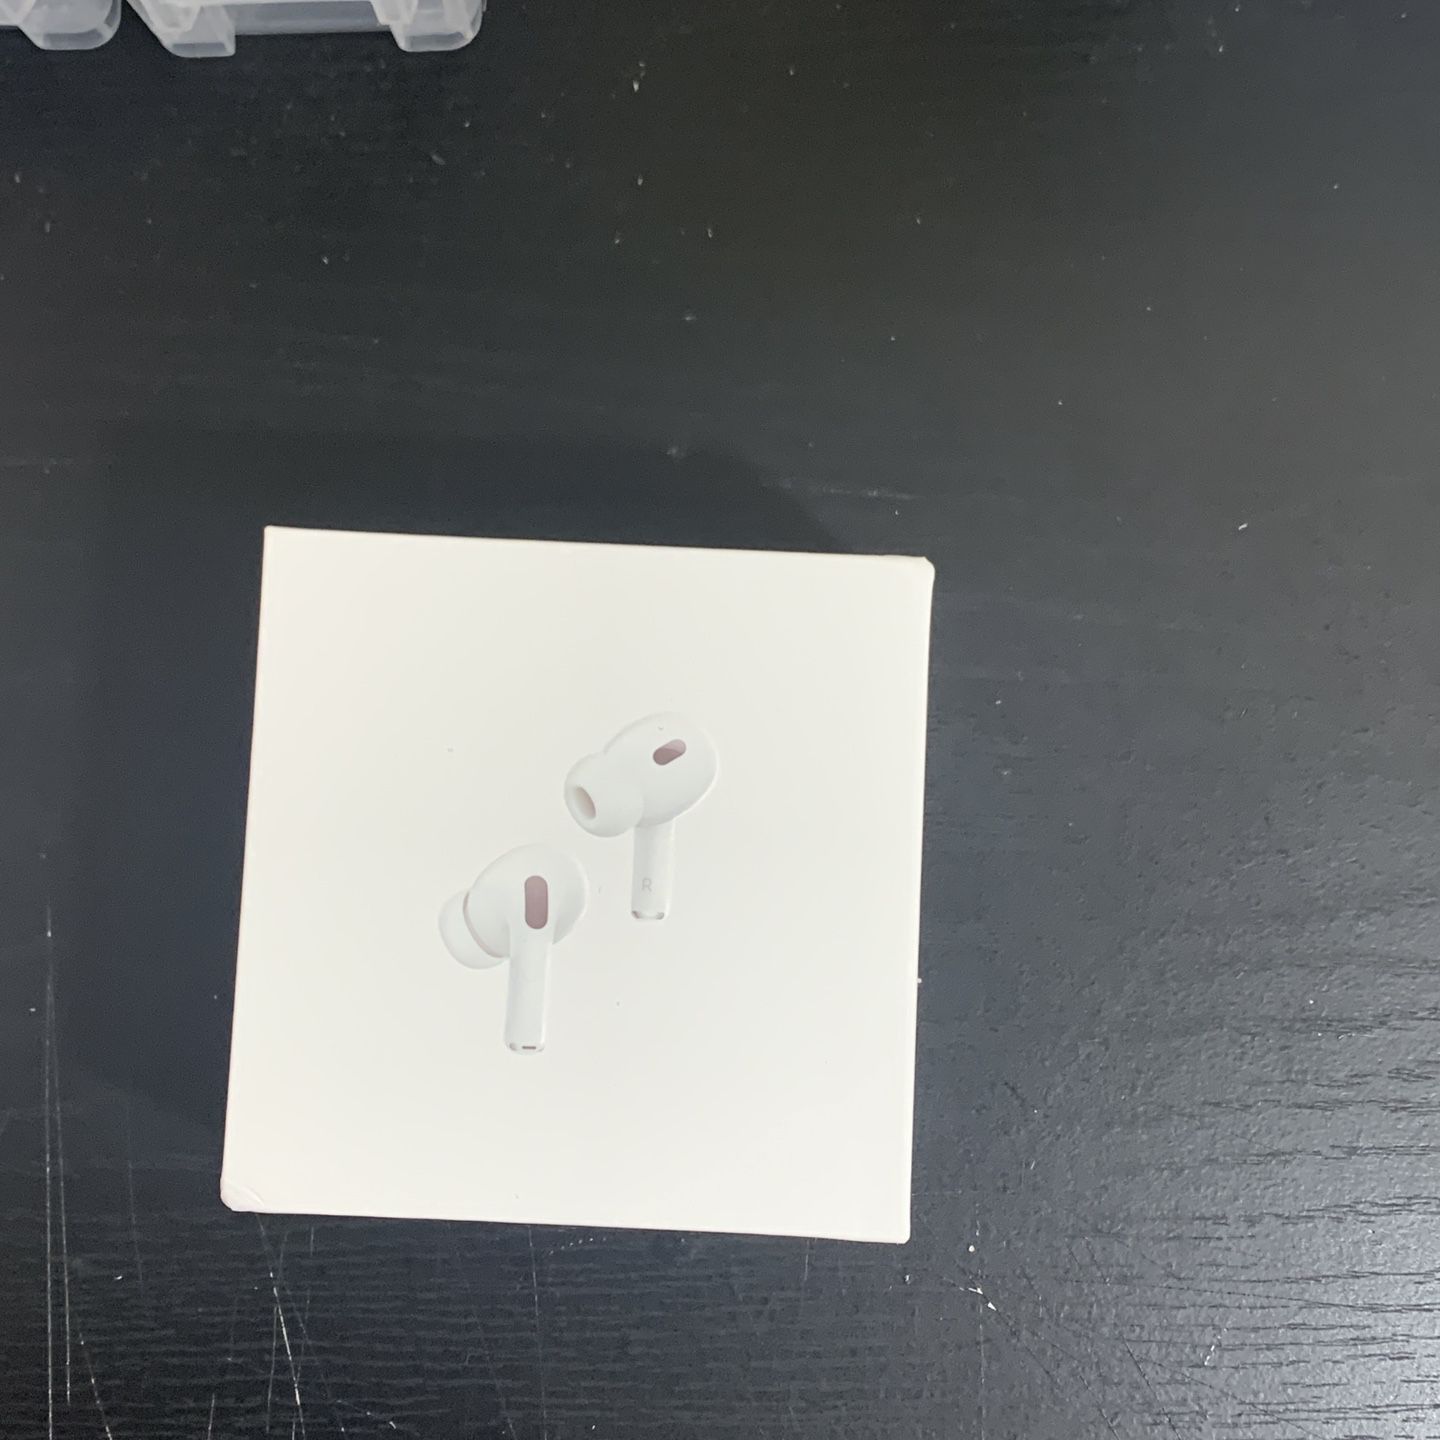 AirPods Pro 2 (NEGOTIABLE)